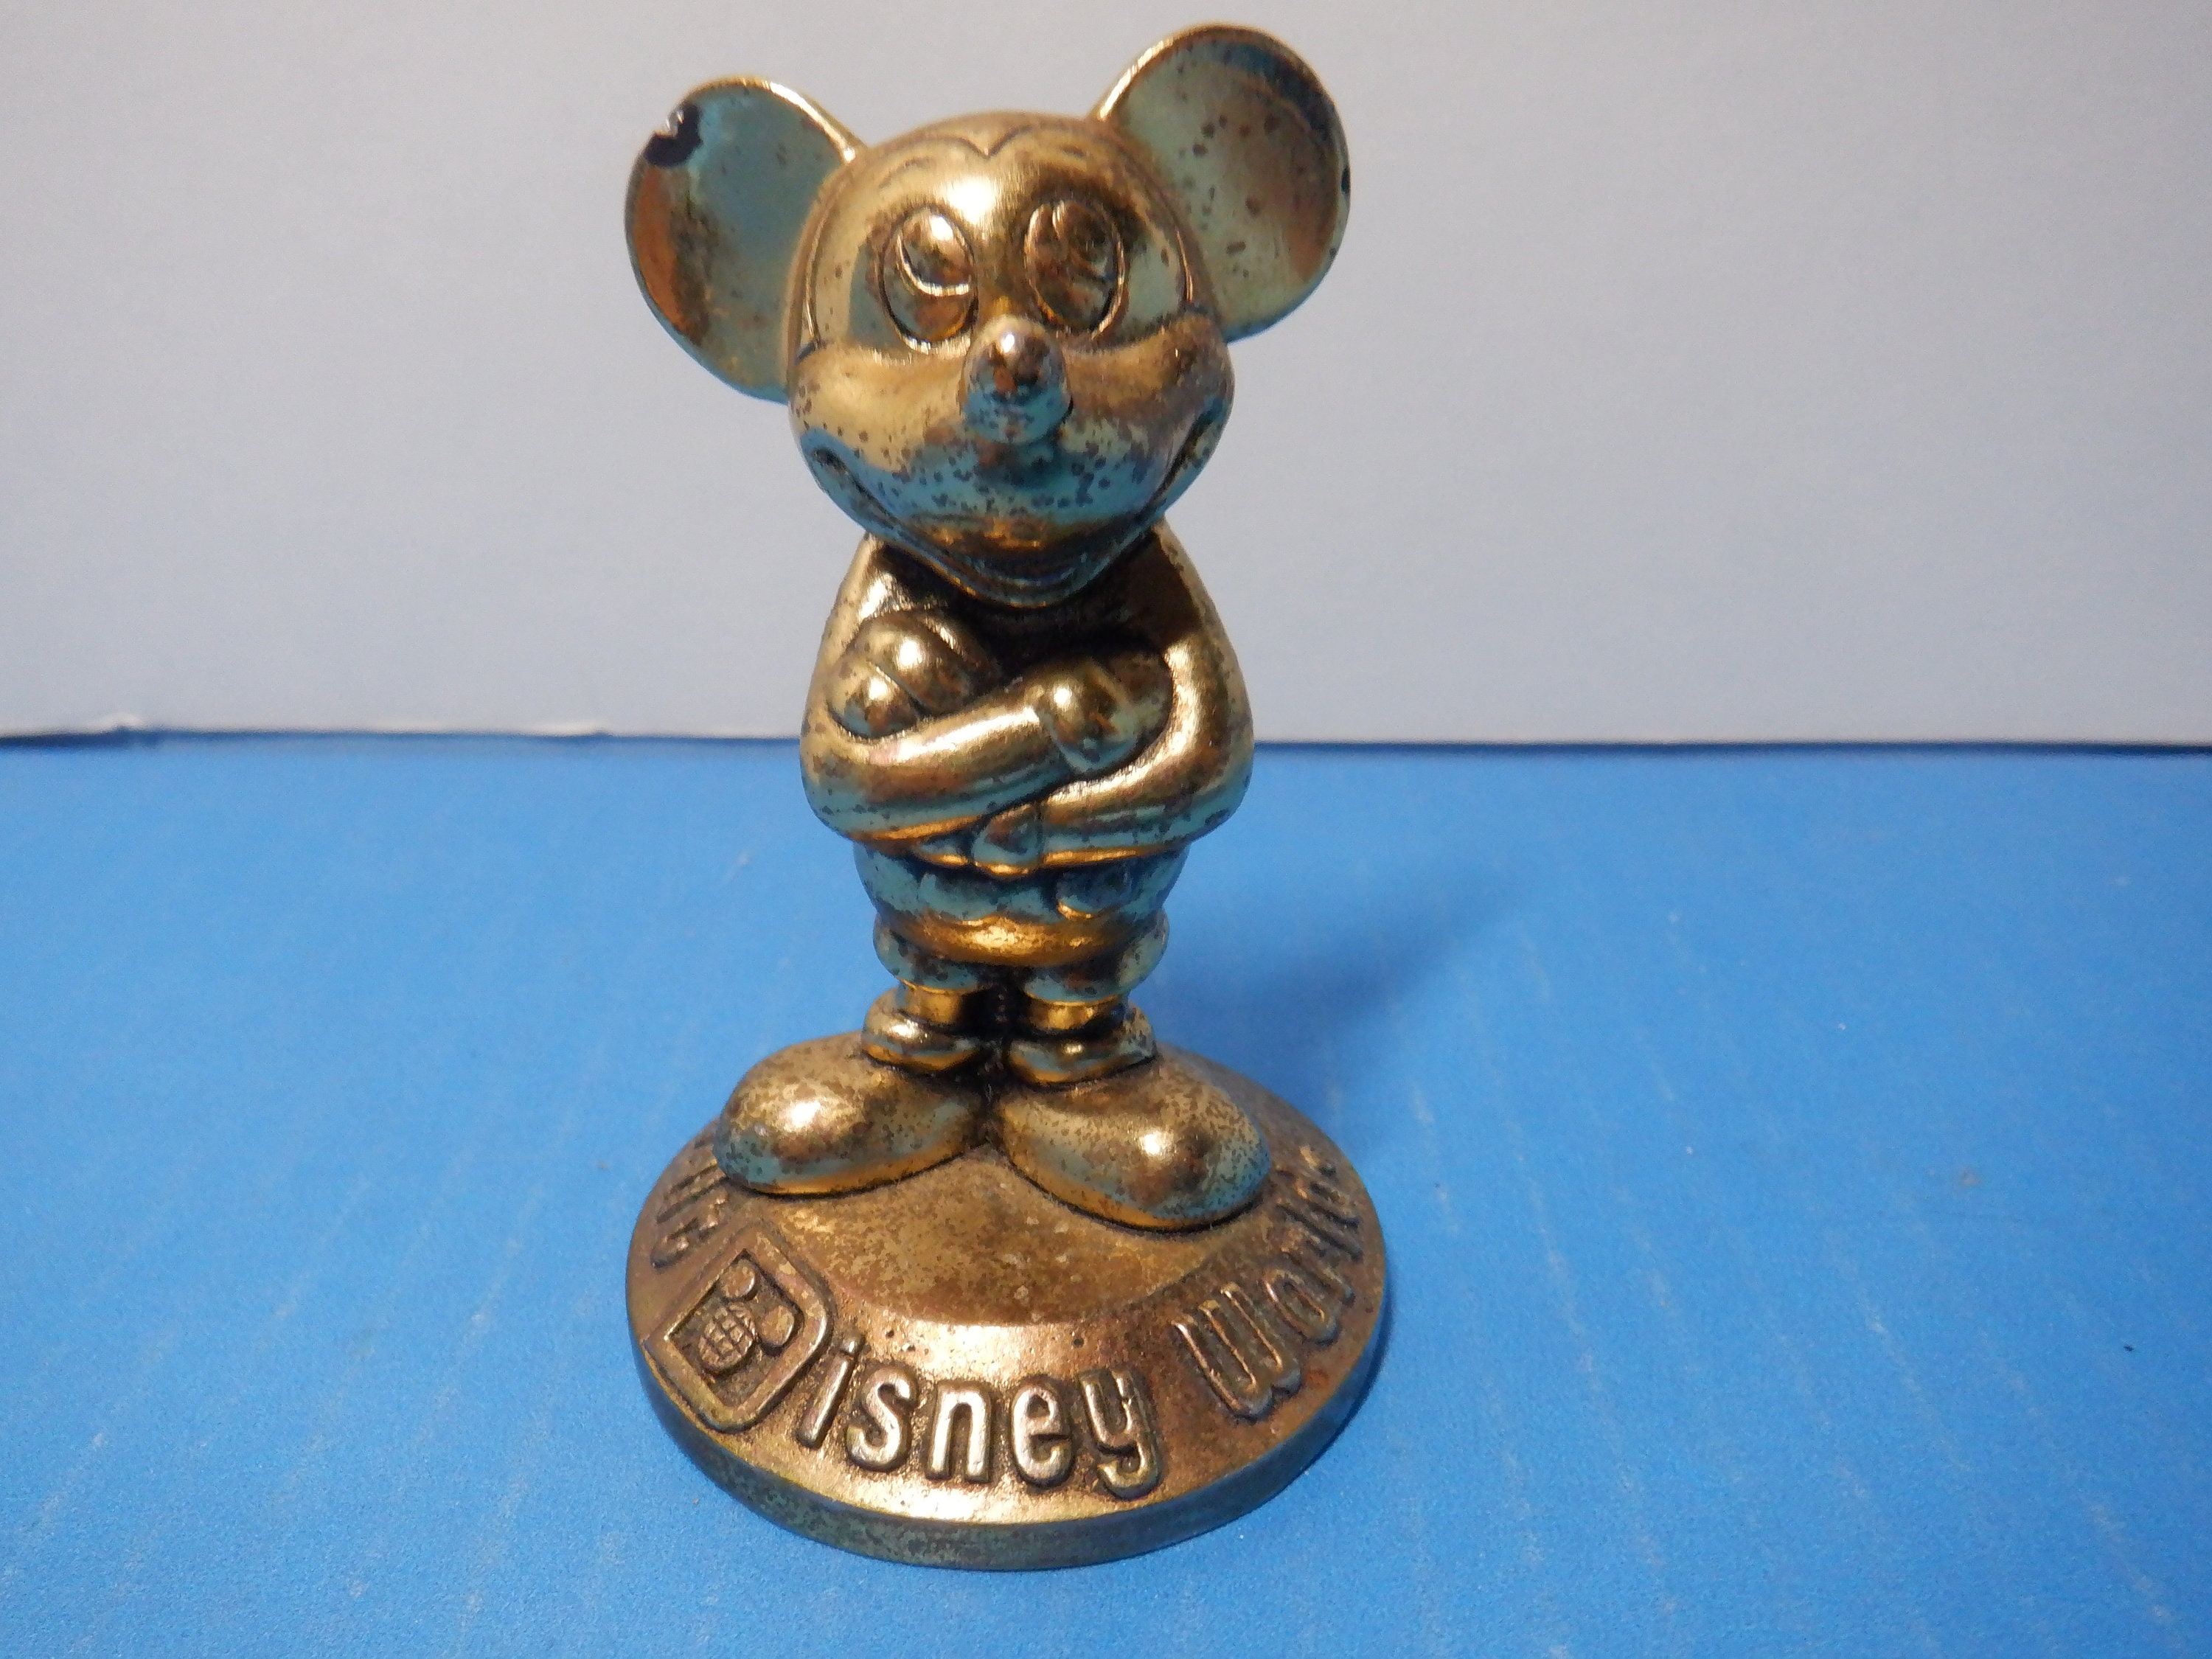 mickey mouse trophy